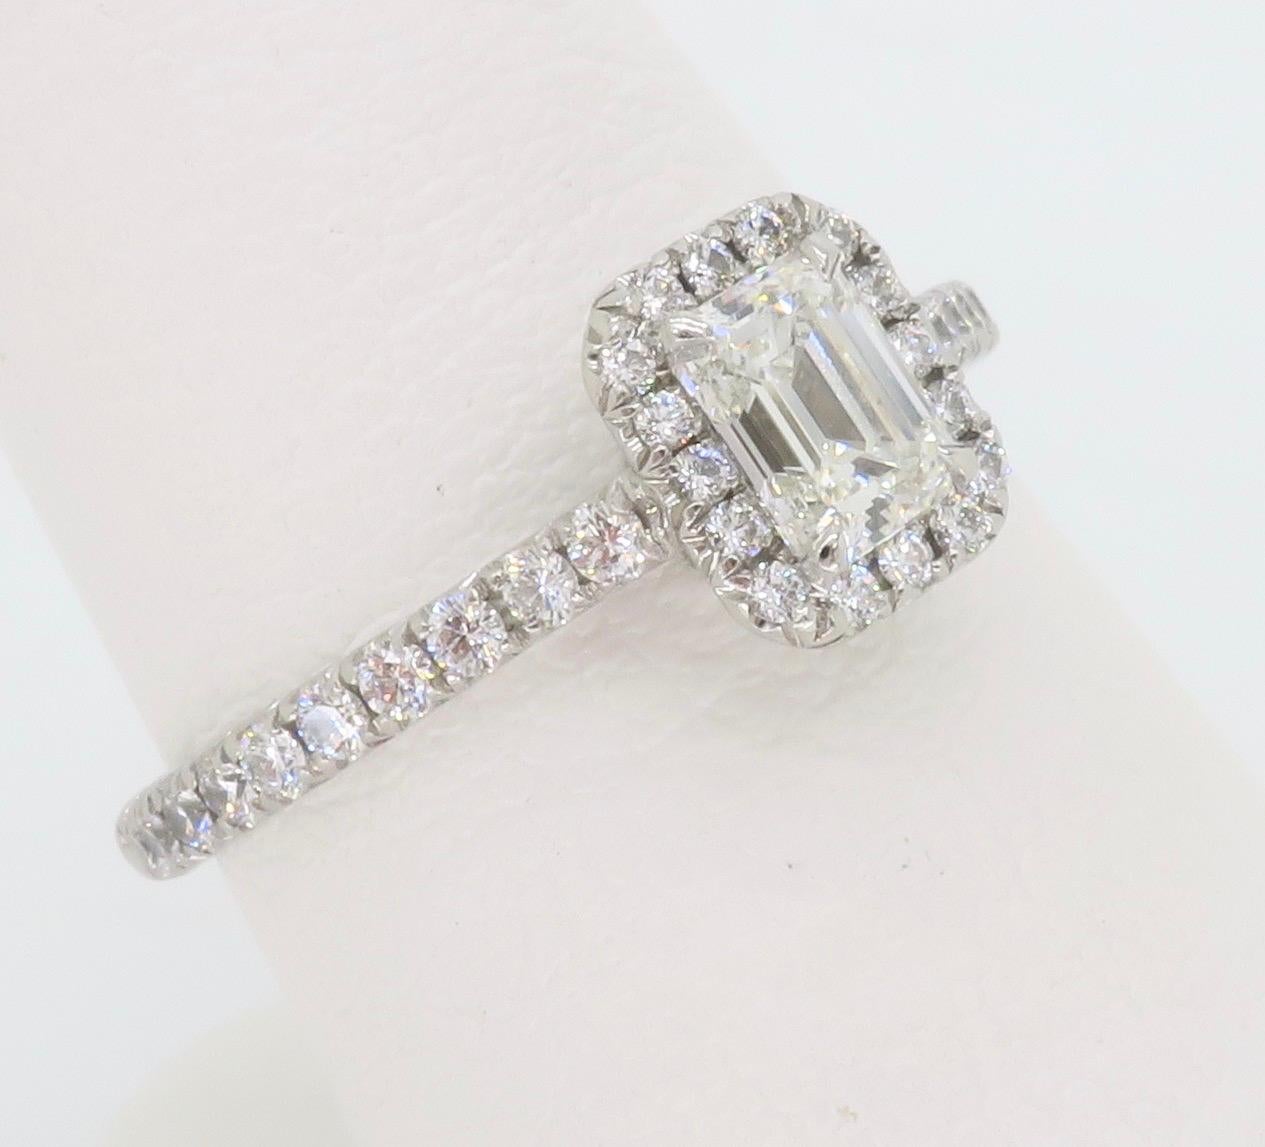 Emerald Cut Tiffany & Co. Soleste Emerald-Cut Halo Engagement Ring Made in Platinum